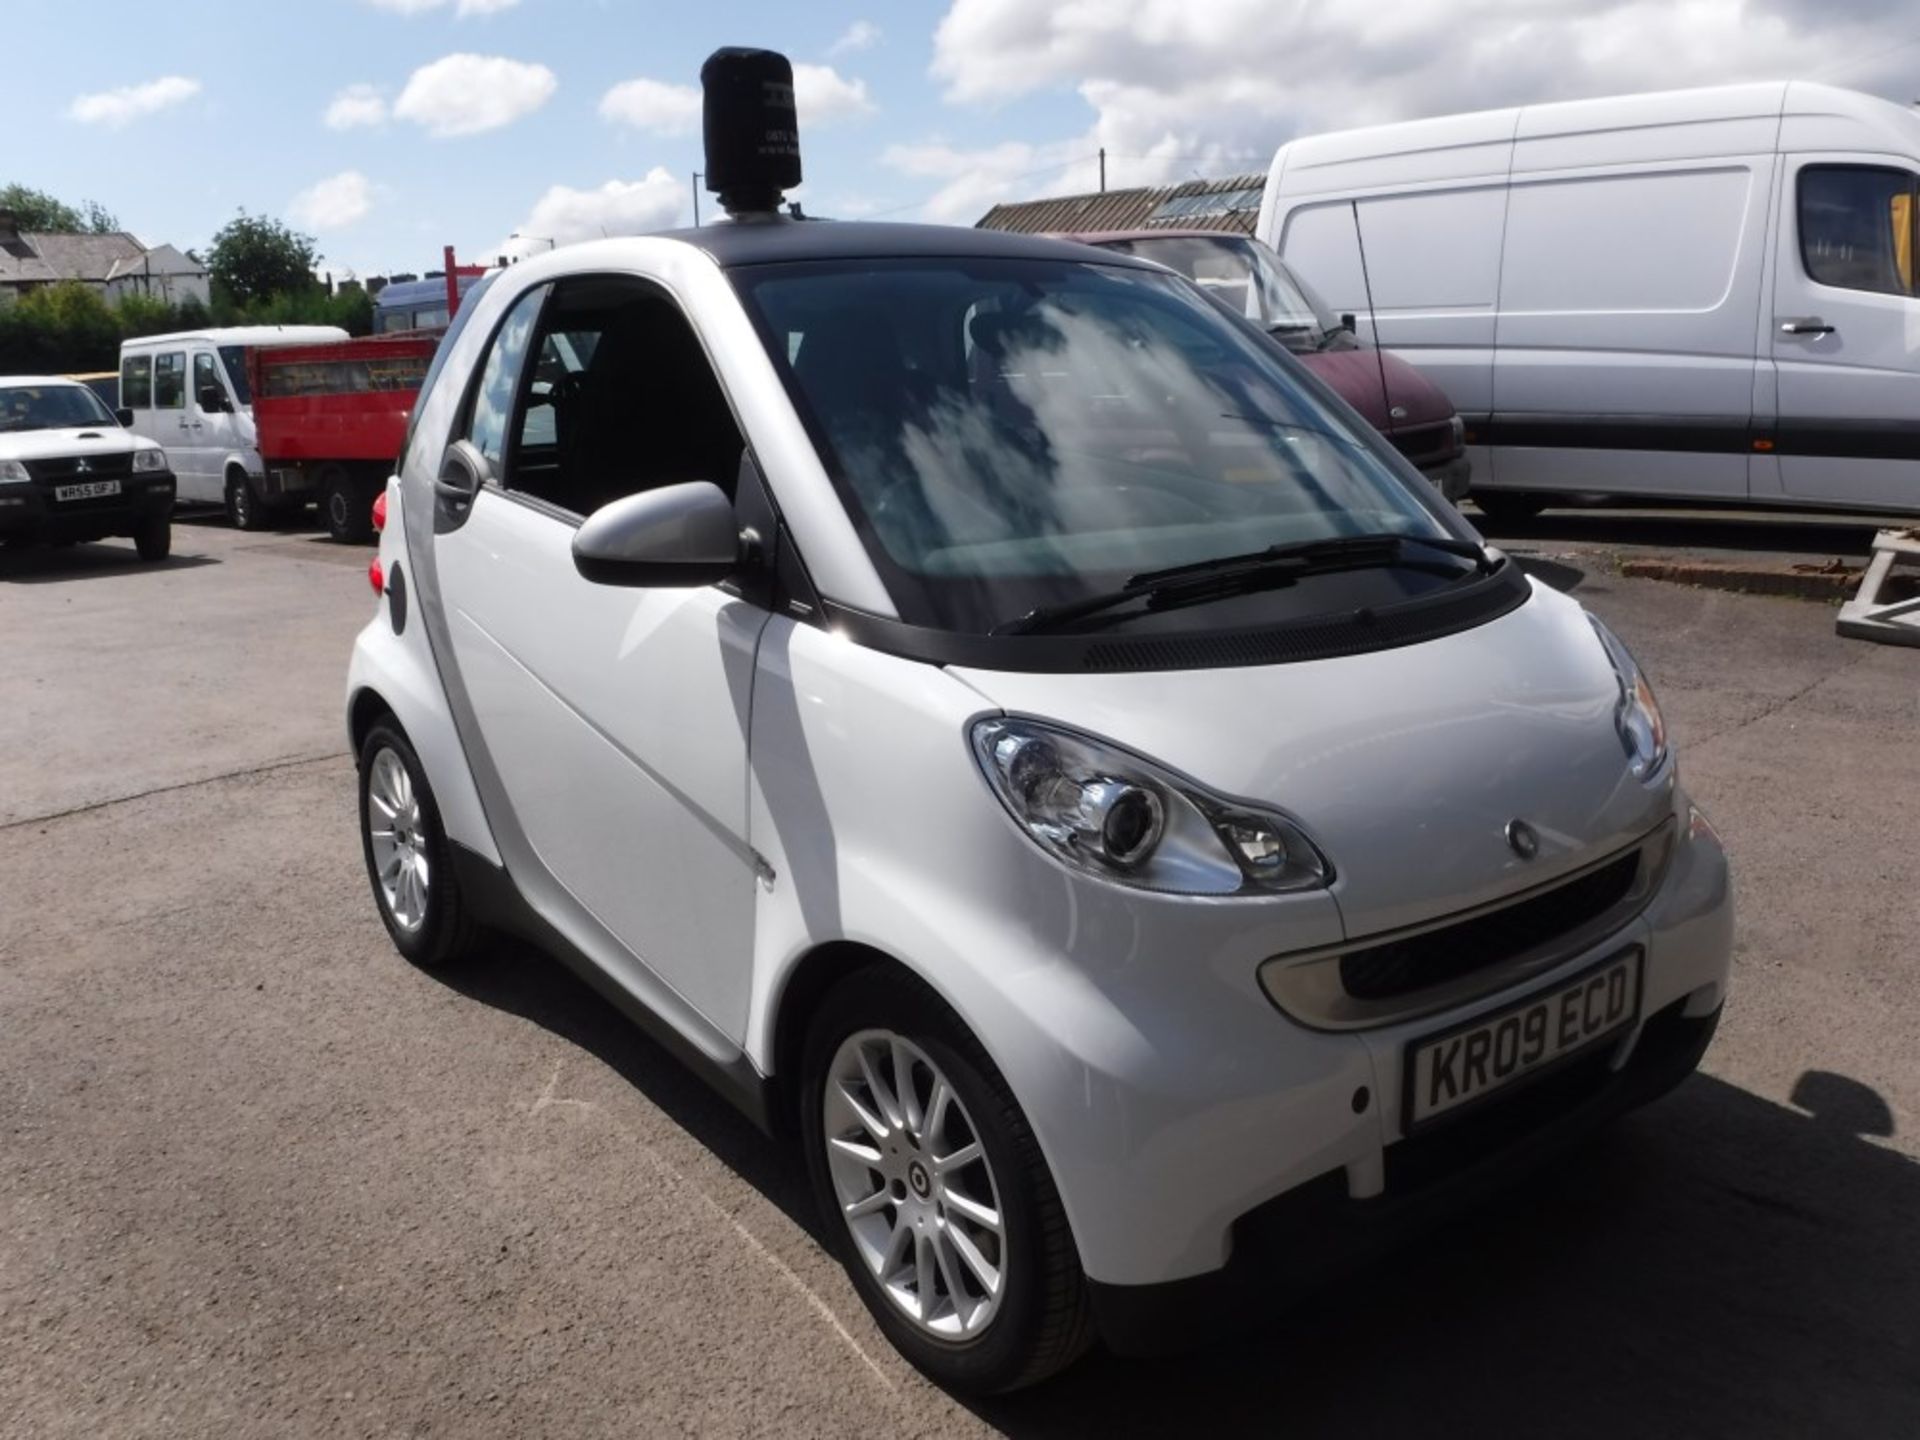 09 ref SMART FORTWO PASSION CDI AUTO COUPE, 1ST REG 06/09, TEST 06/16, 42483M WARRANTED, V5 HERE,